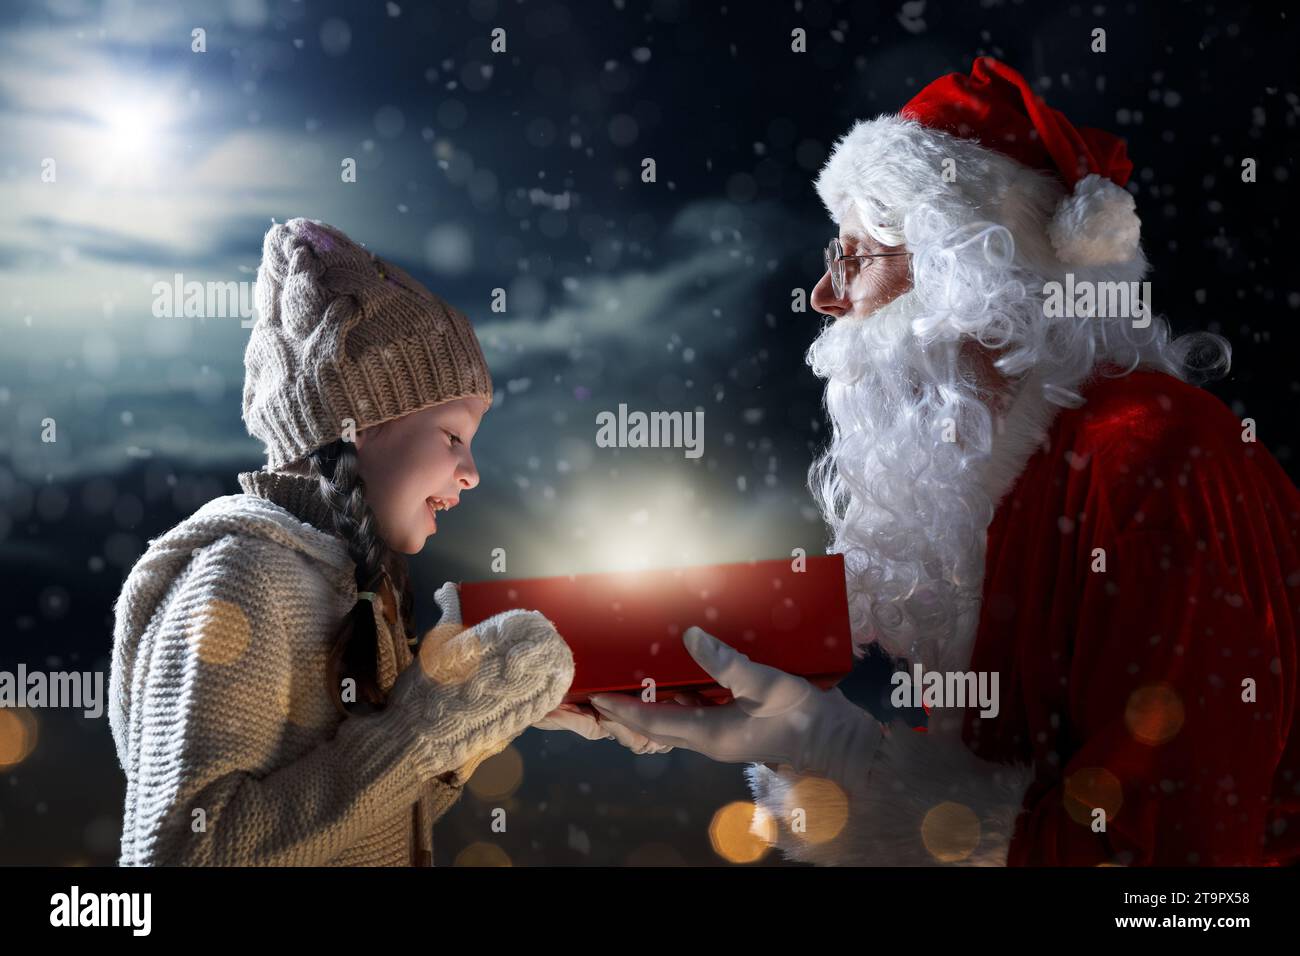 Merry Christmas and happy holidays. Cute little child girl and Santa Claus with gift. Christmas legend concept. Stock Photo